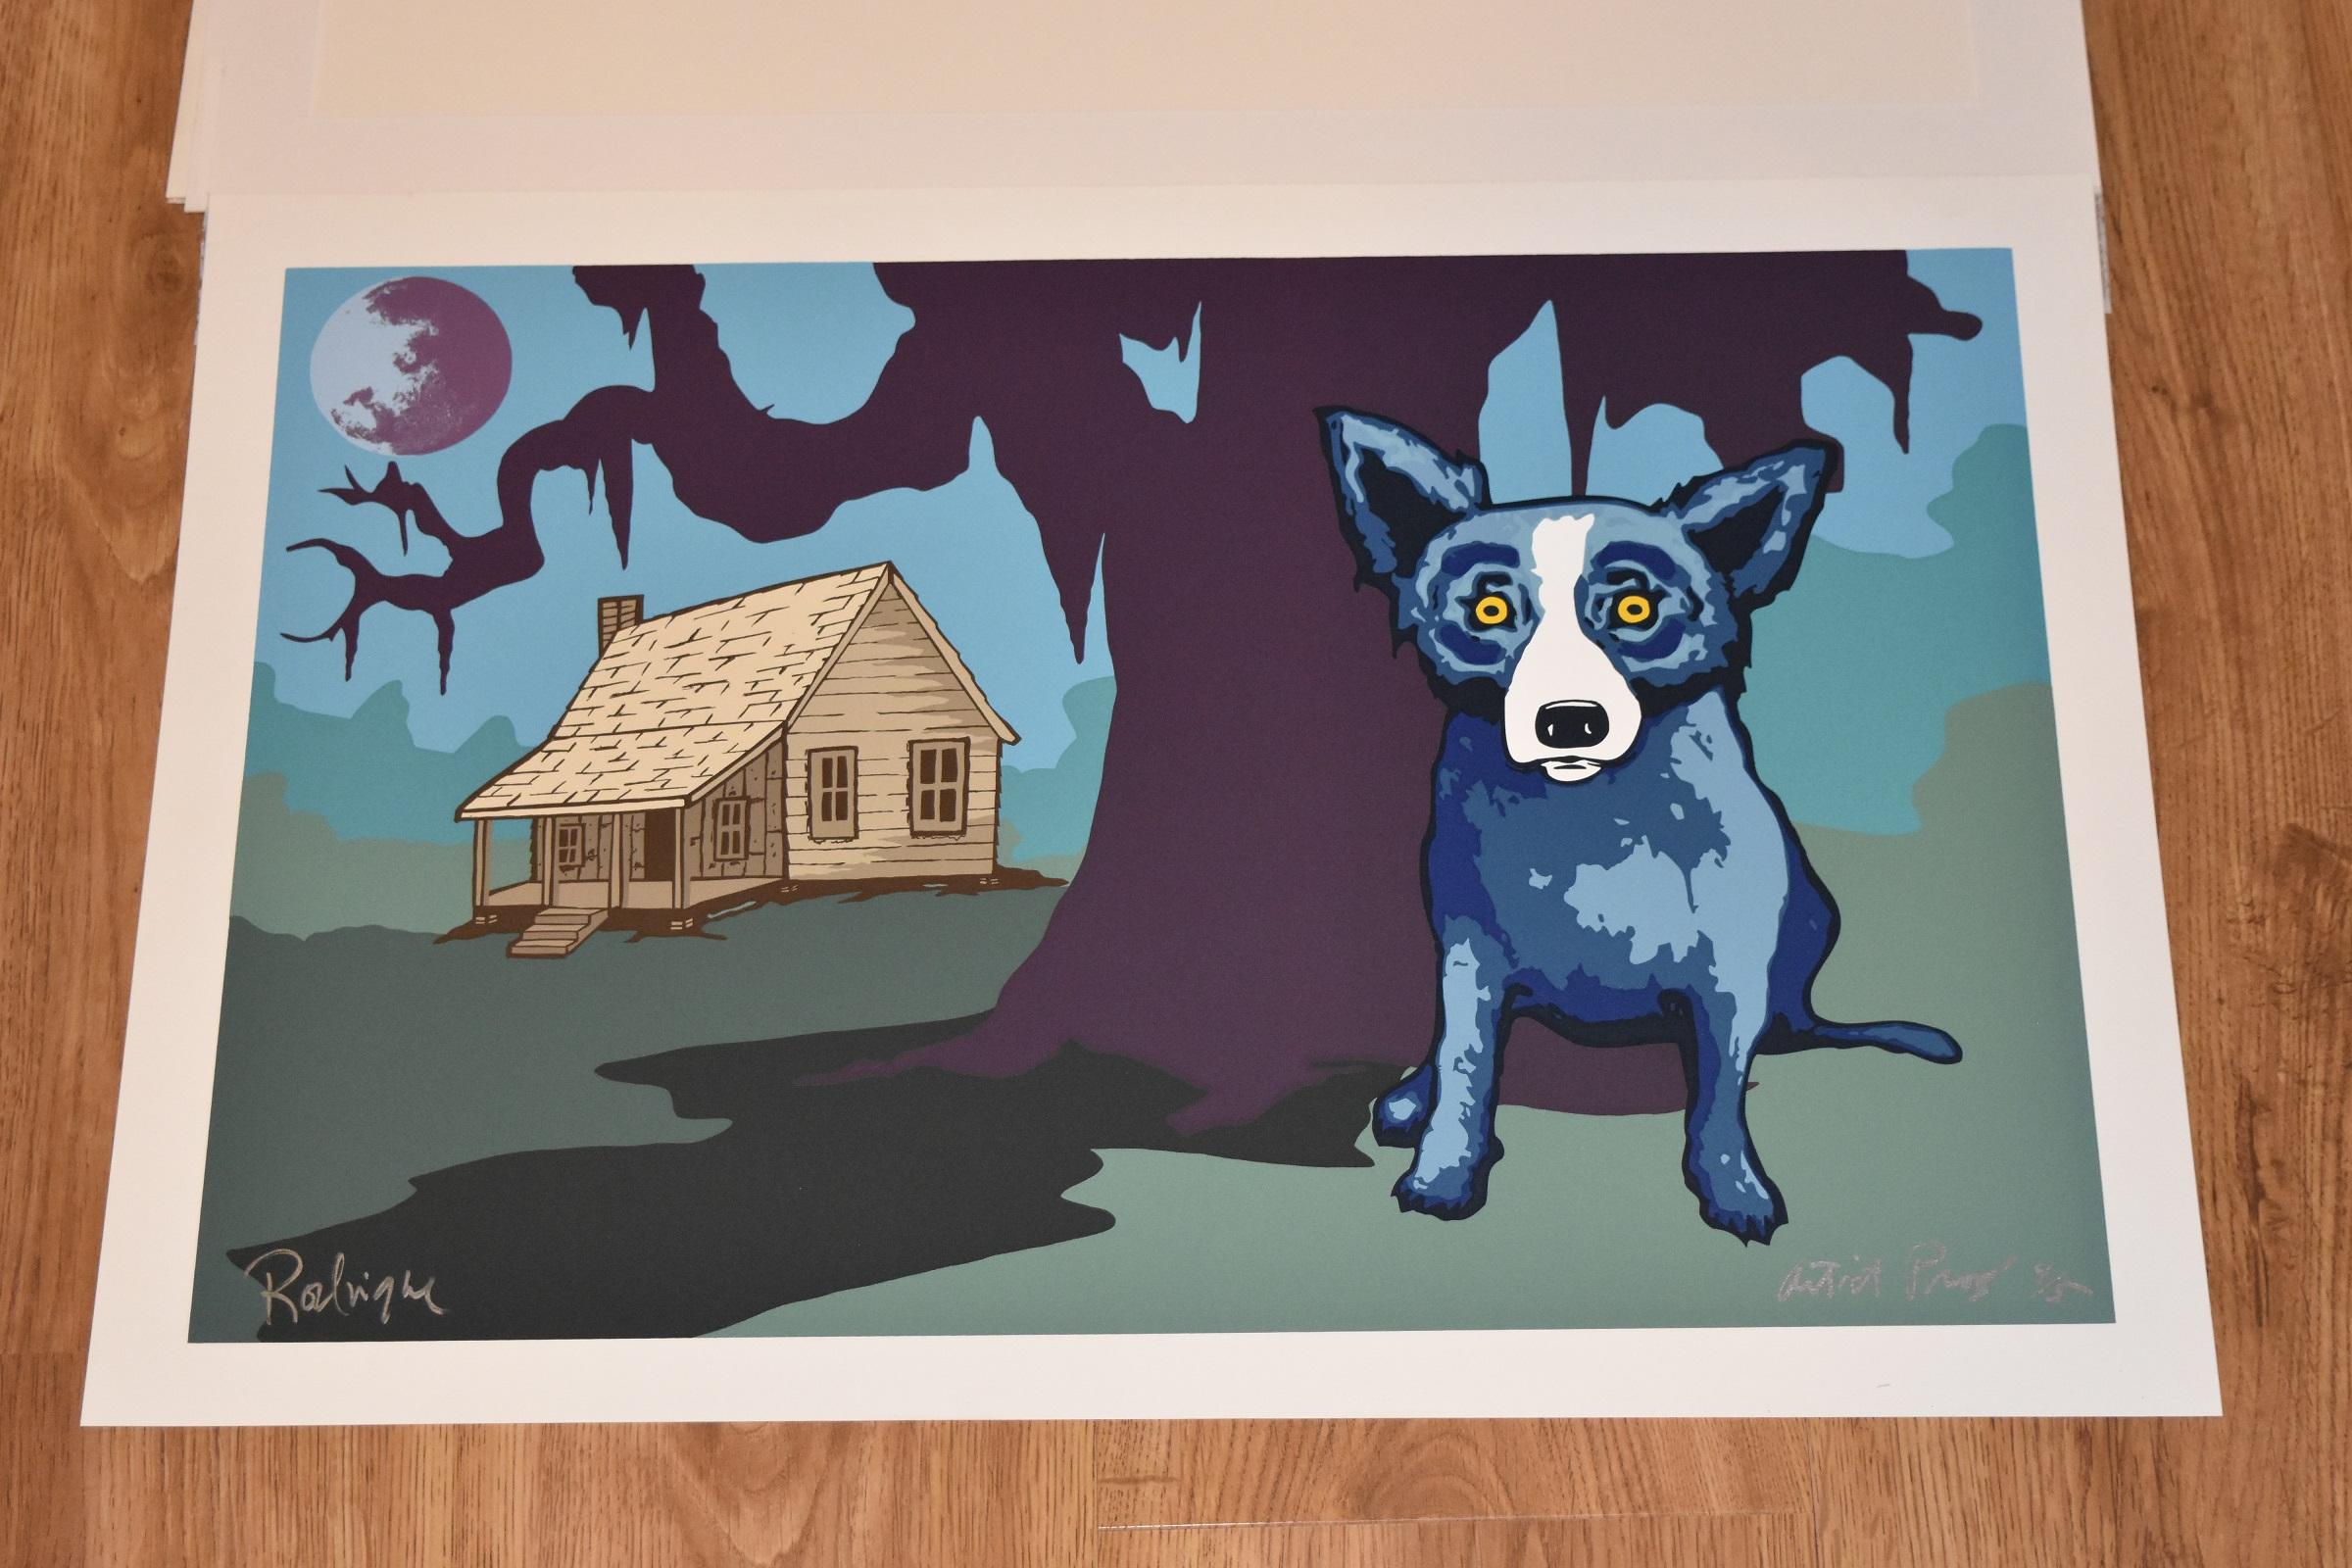 The House My Daddy Built with Moon - Signed Silkscreen Print Blue Dog - Gray Animal Print by George Rodrigue